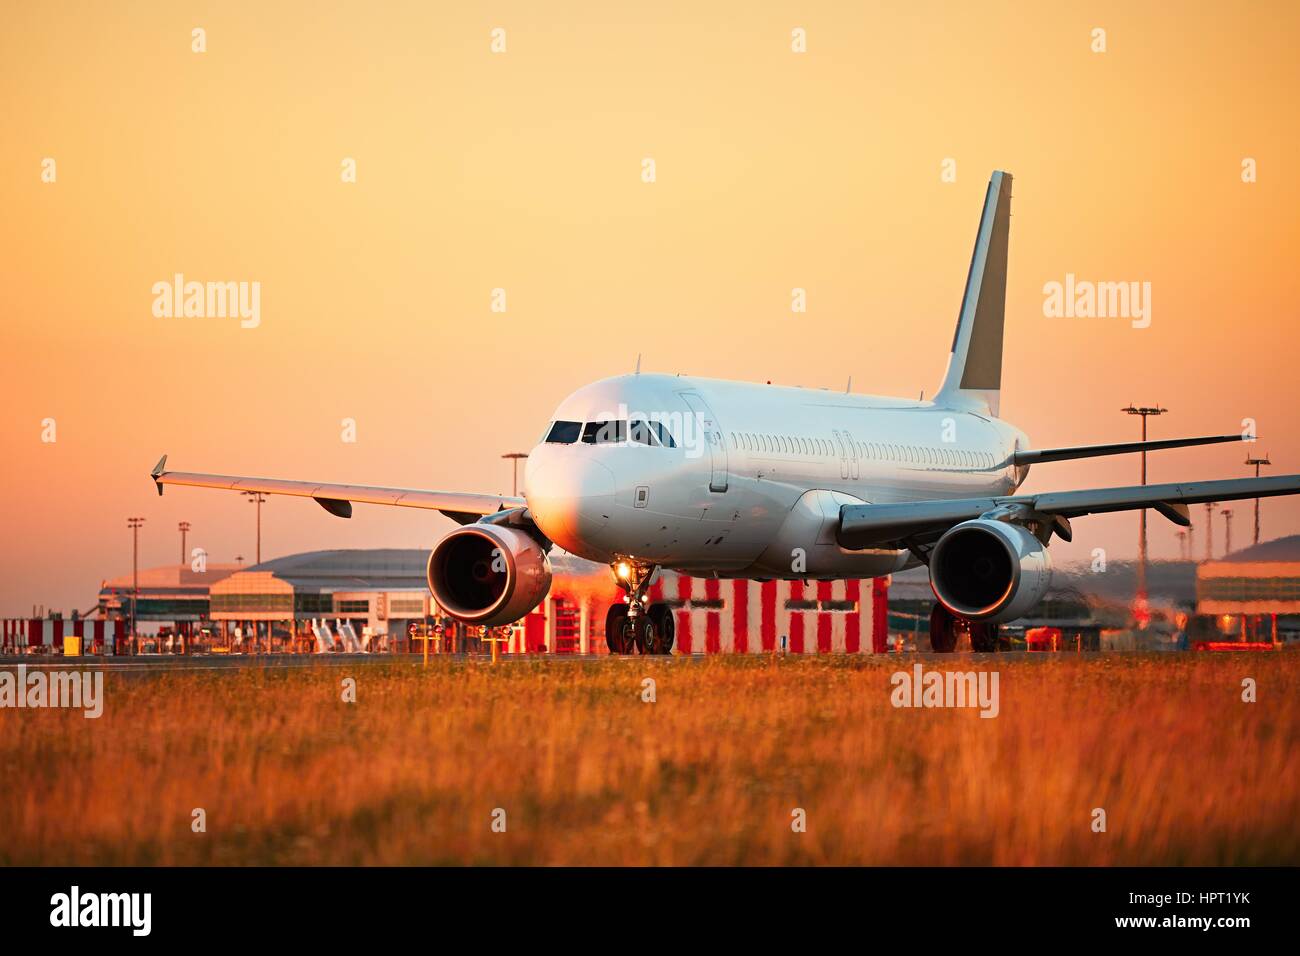 Airport at the sunset light. Airplane is taxiing to the runway for take off. Stock Photo